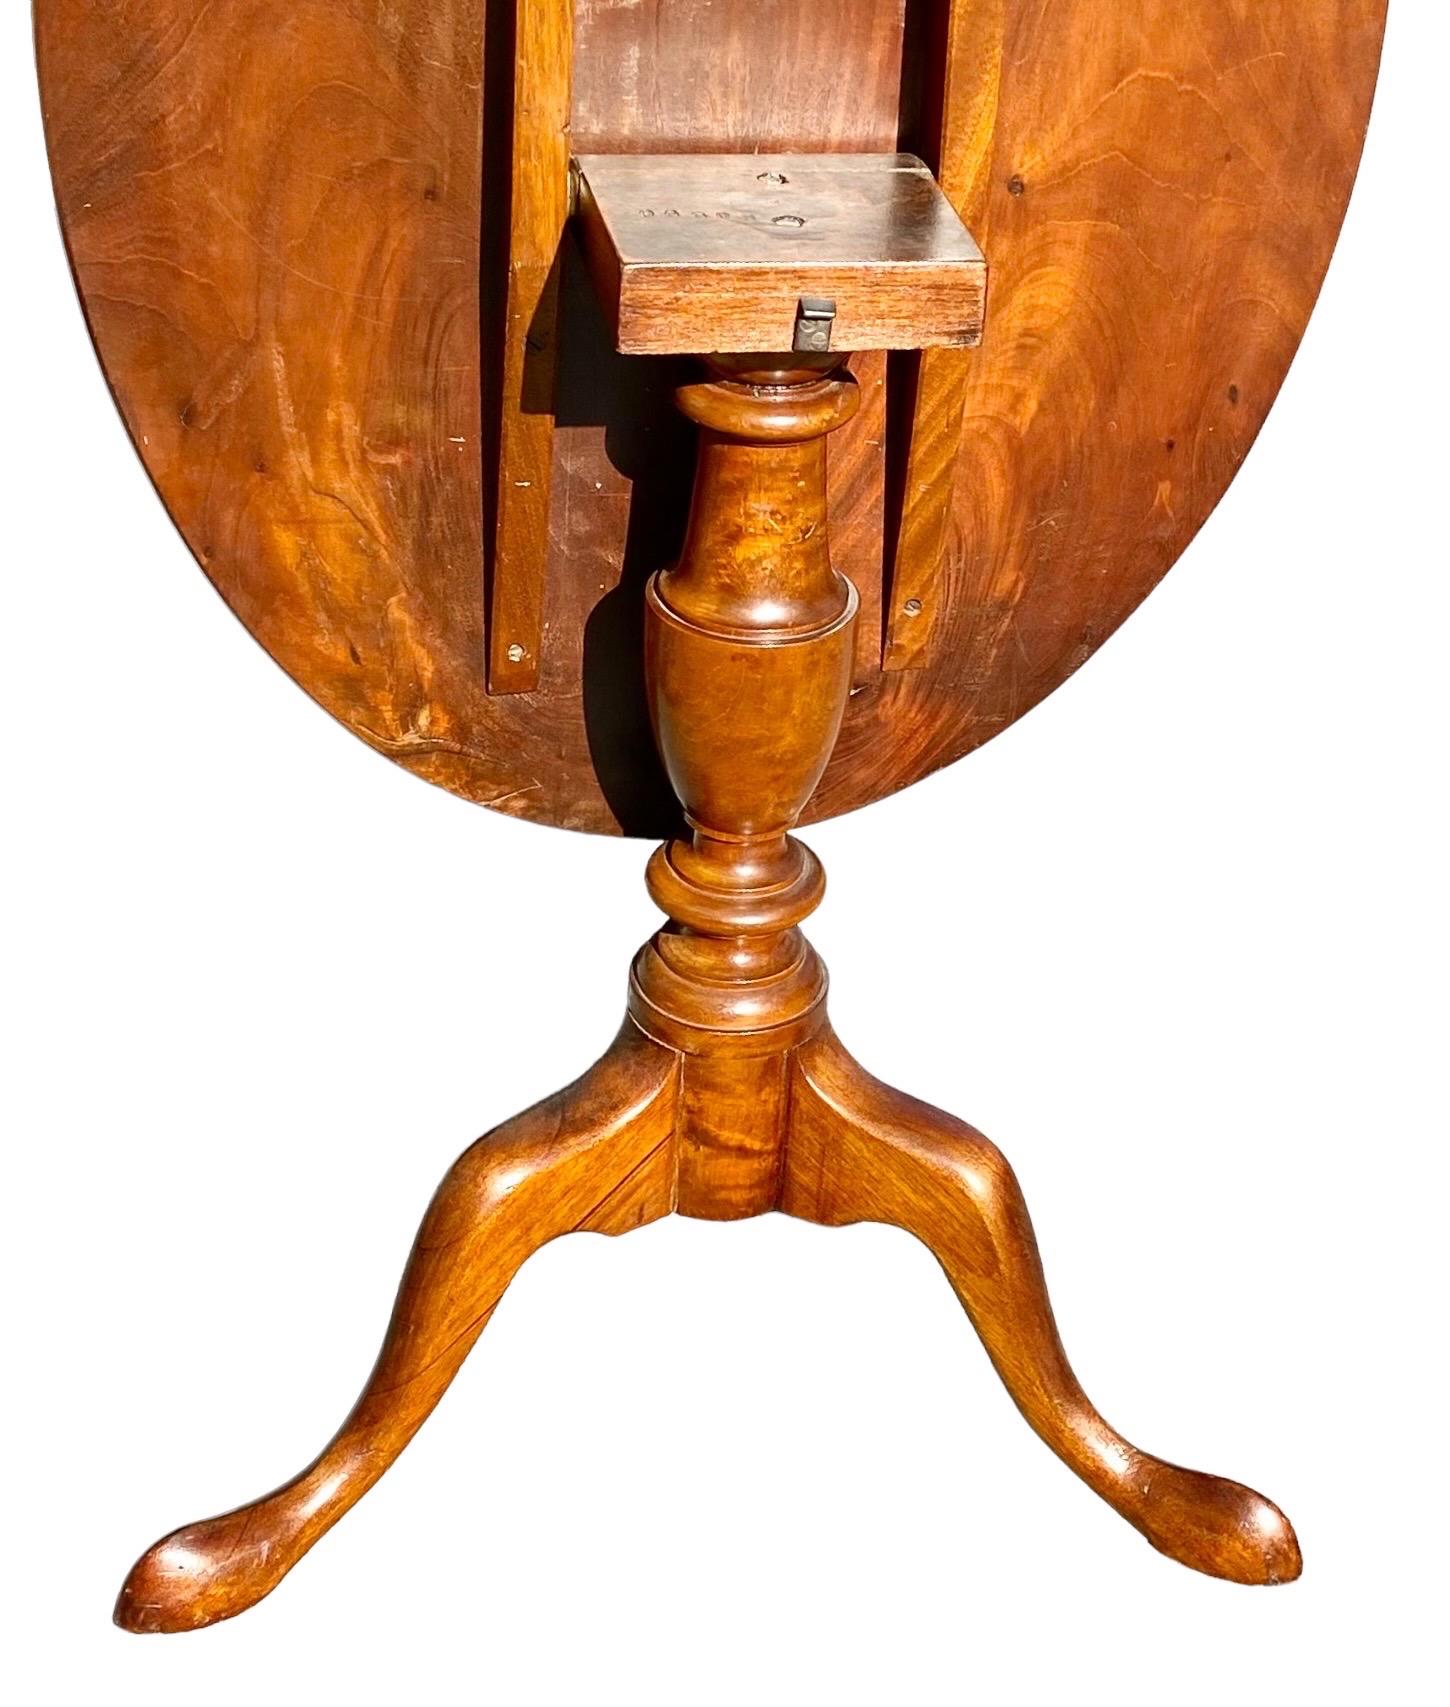 A fine antique English Edwardian, inlaid and beautifully figured mahogany tilt top side table, circa 1900-1910, the oval top on a turned support to tripodal, pointed pad feet. 

A lovely example of the English Edwardian period having beautiful